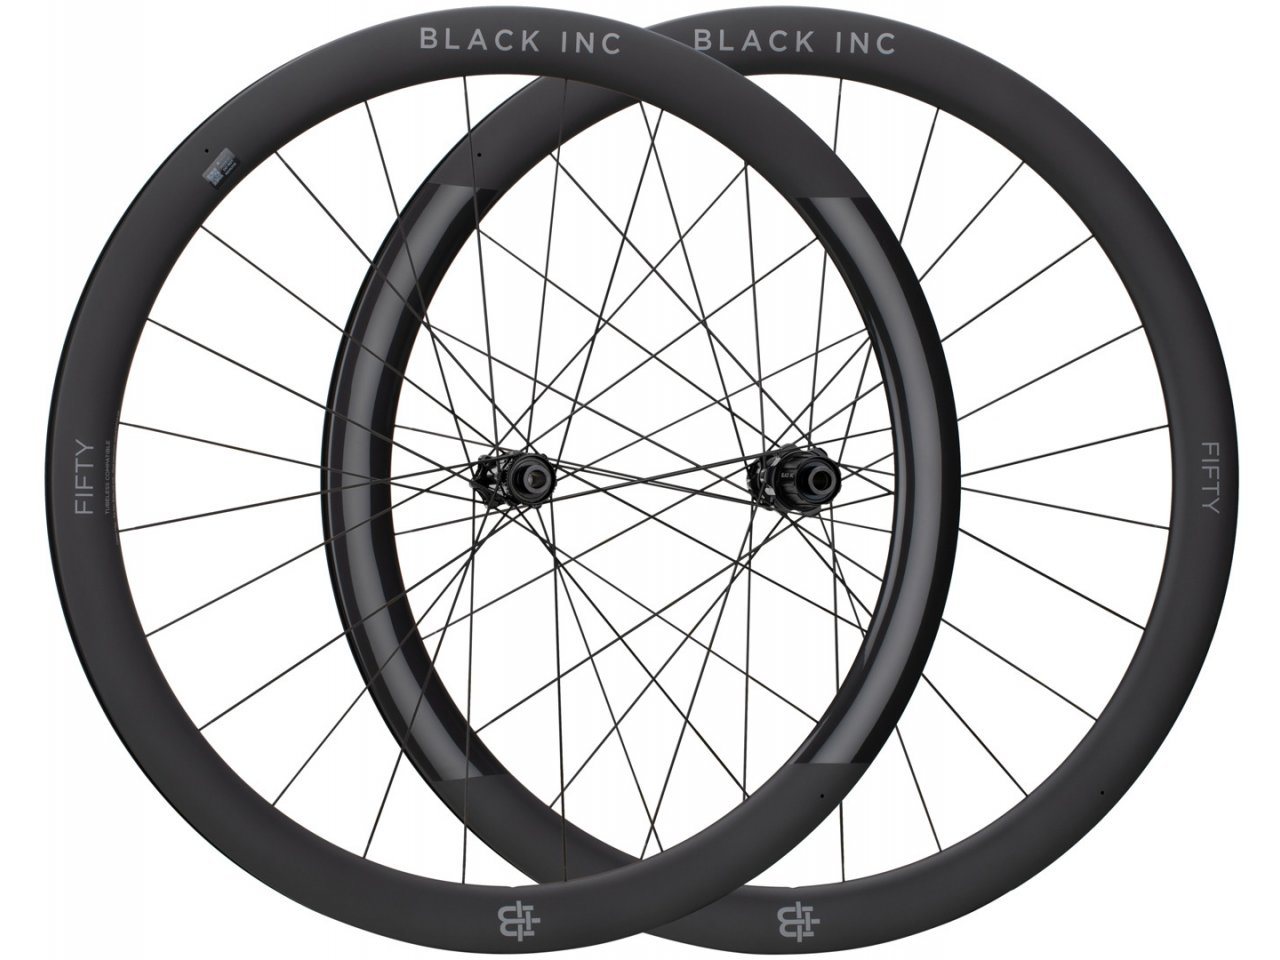 Pair of Black Forty Five Disc CL (XDR) Team Edition 2.0 Black Inc wheels 